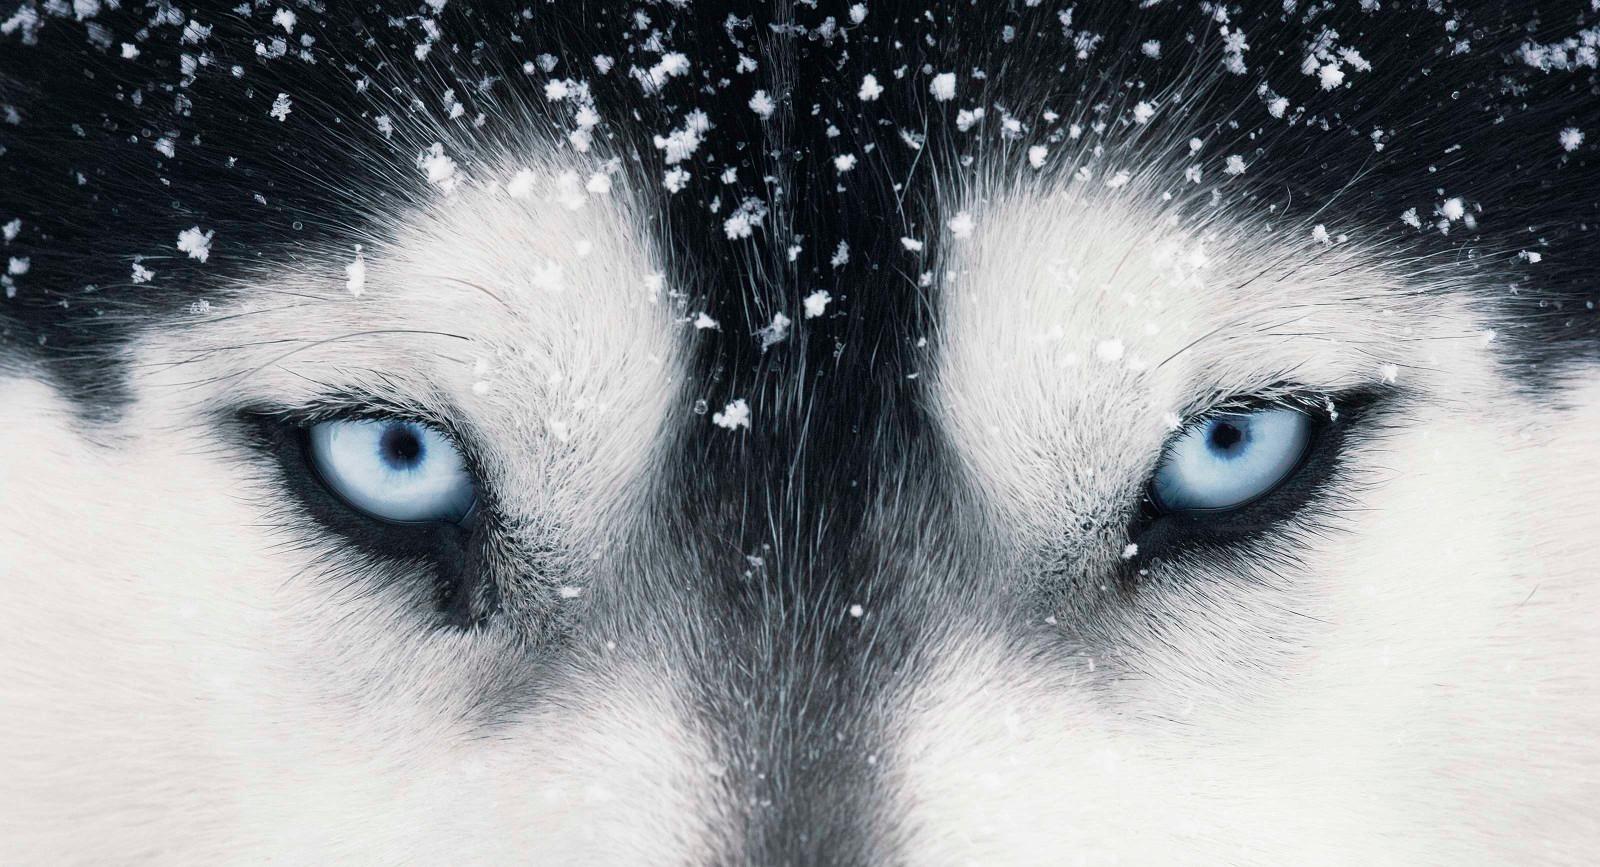 Cleopatra Eyes - Tim Flach, Contemporary British Art, Animal Photography, Dogs